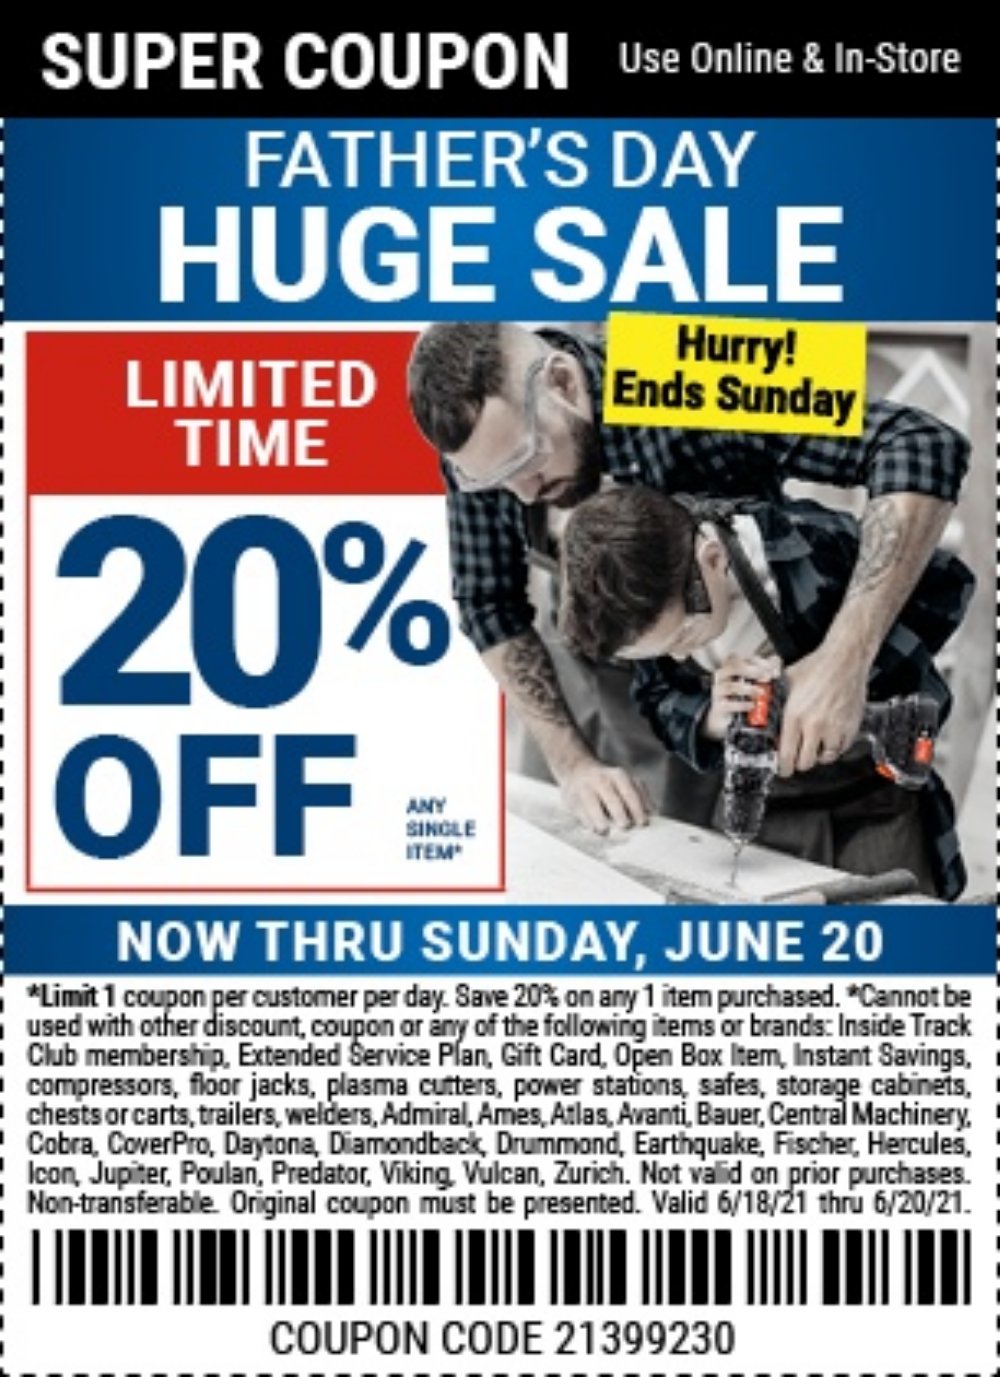 Harbor Freight Coupon, HF Coupons - 20% off single item